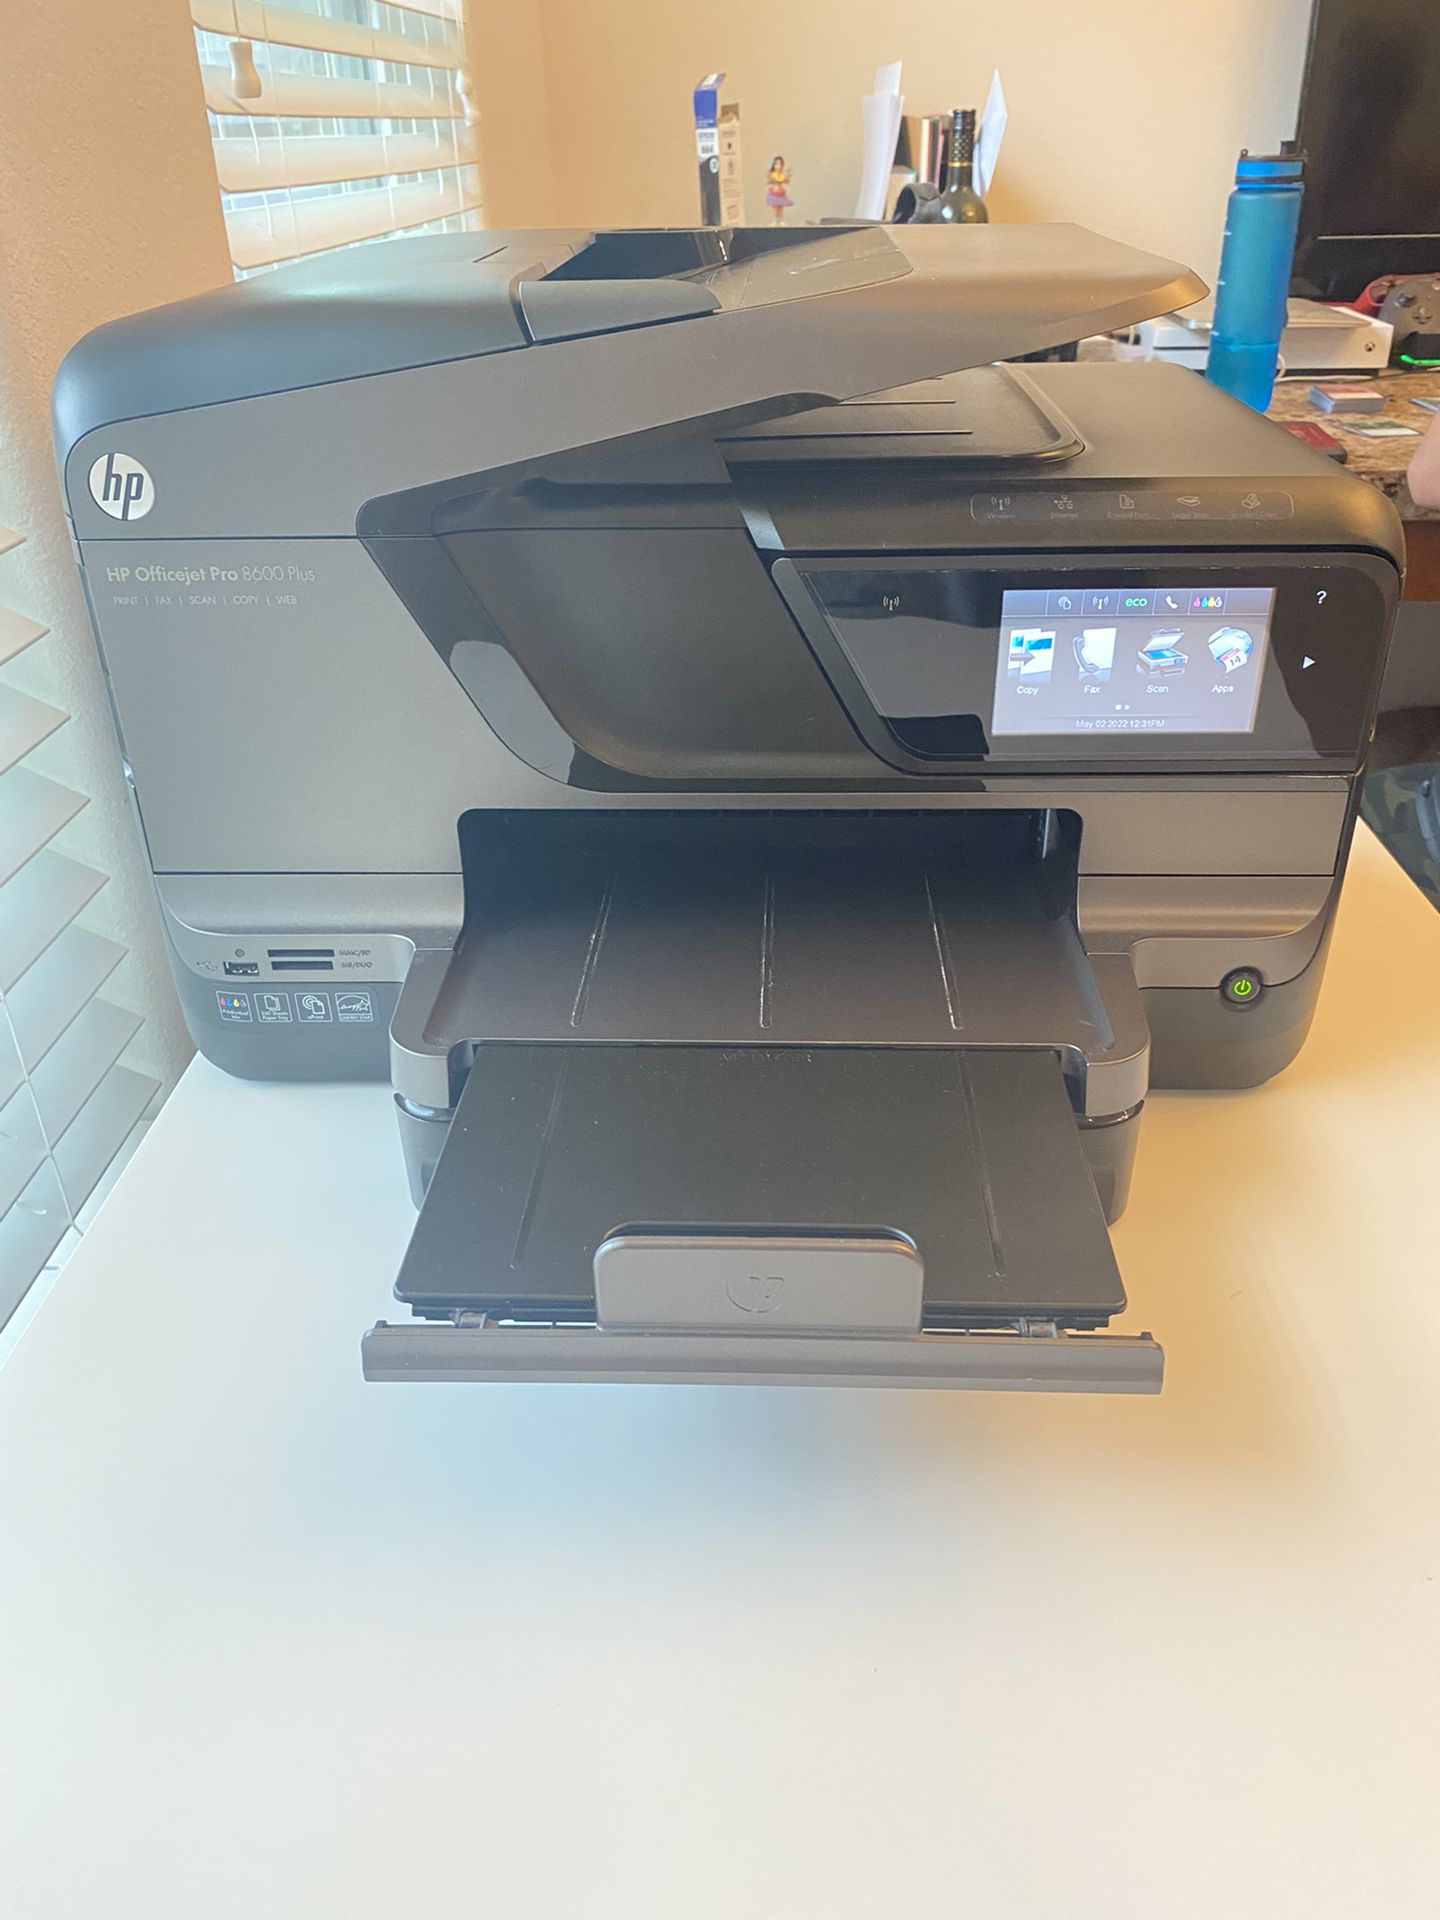 HP Officejet Pro Plus All In One Ink Jet Printer, Tested And Working for Sale in Houston, TX -